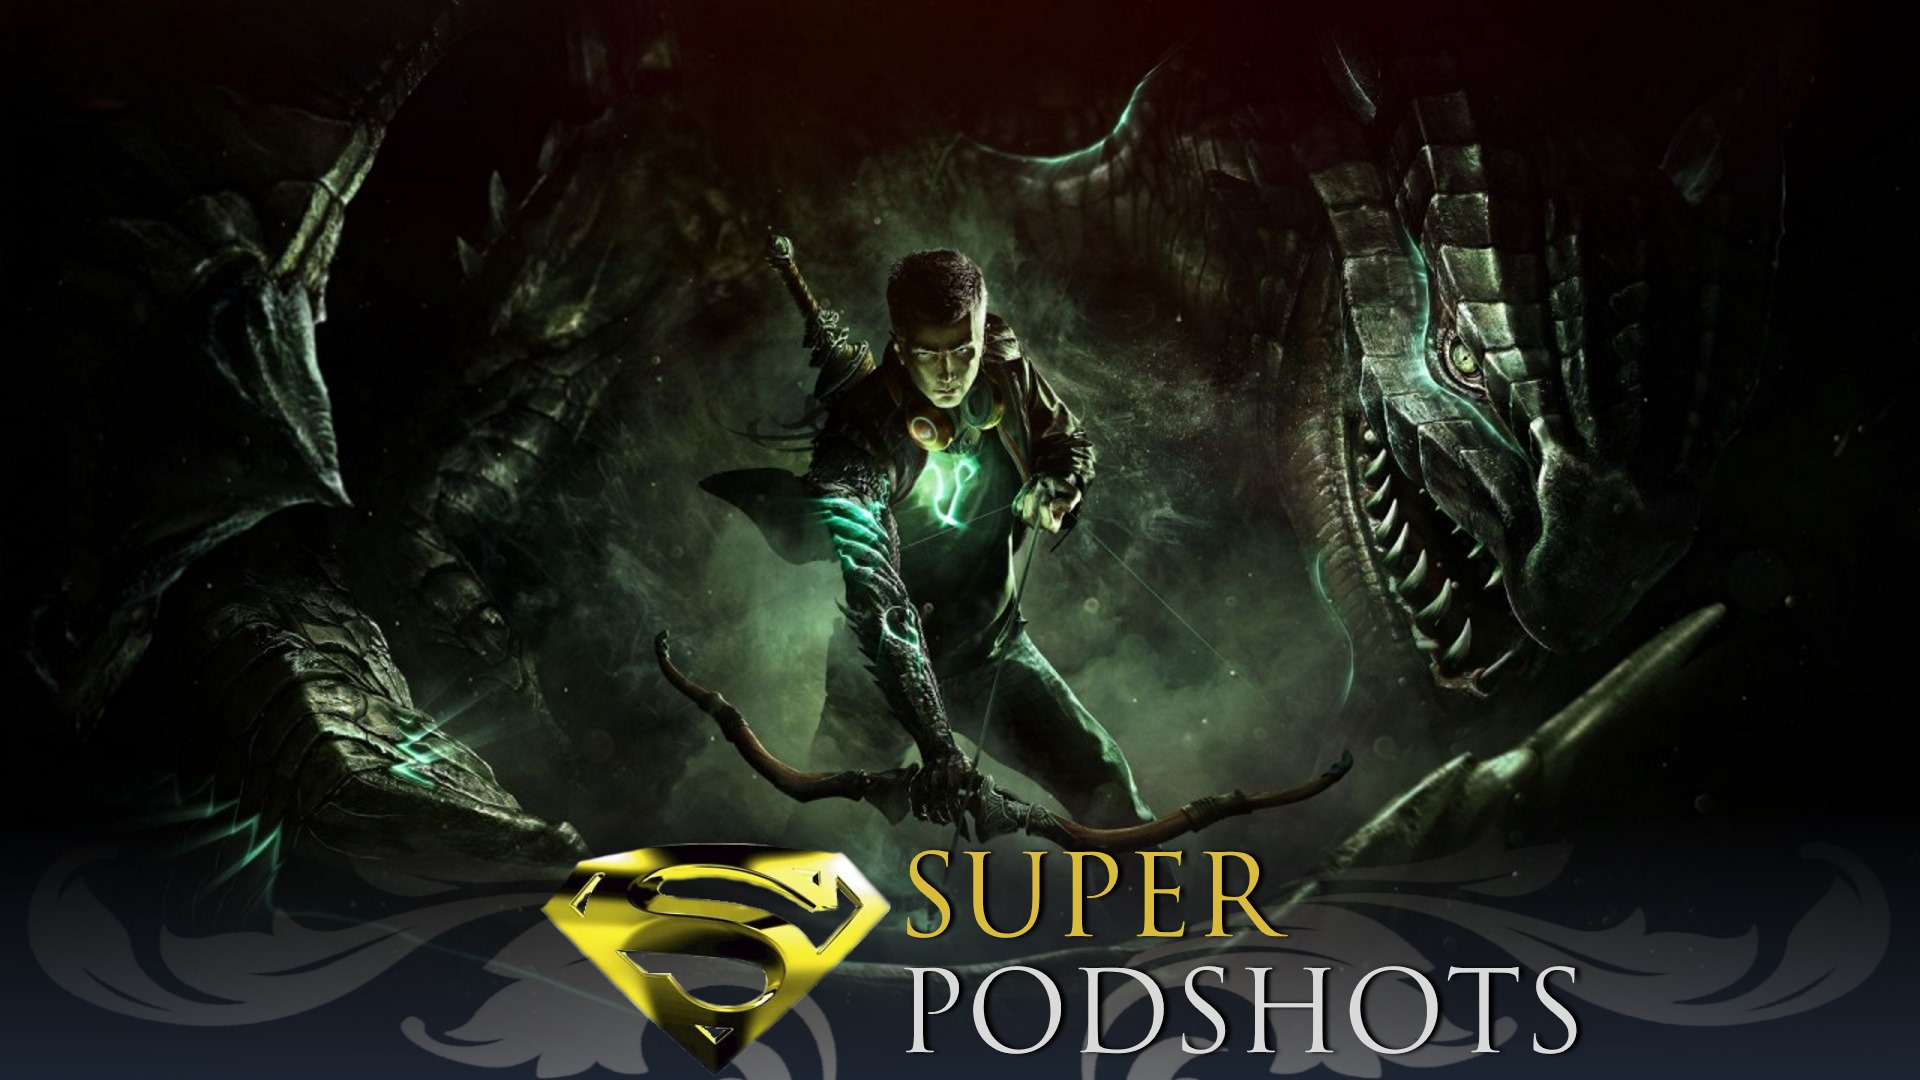 Super Podshots Q&A Special - Scalebound is Dead but Phil Spencer Confident in E3 2017 Lineup